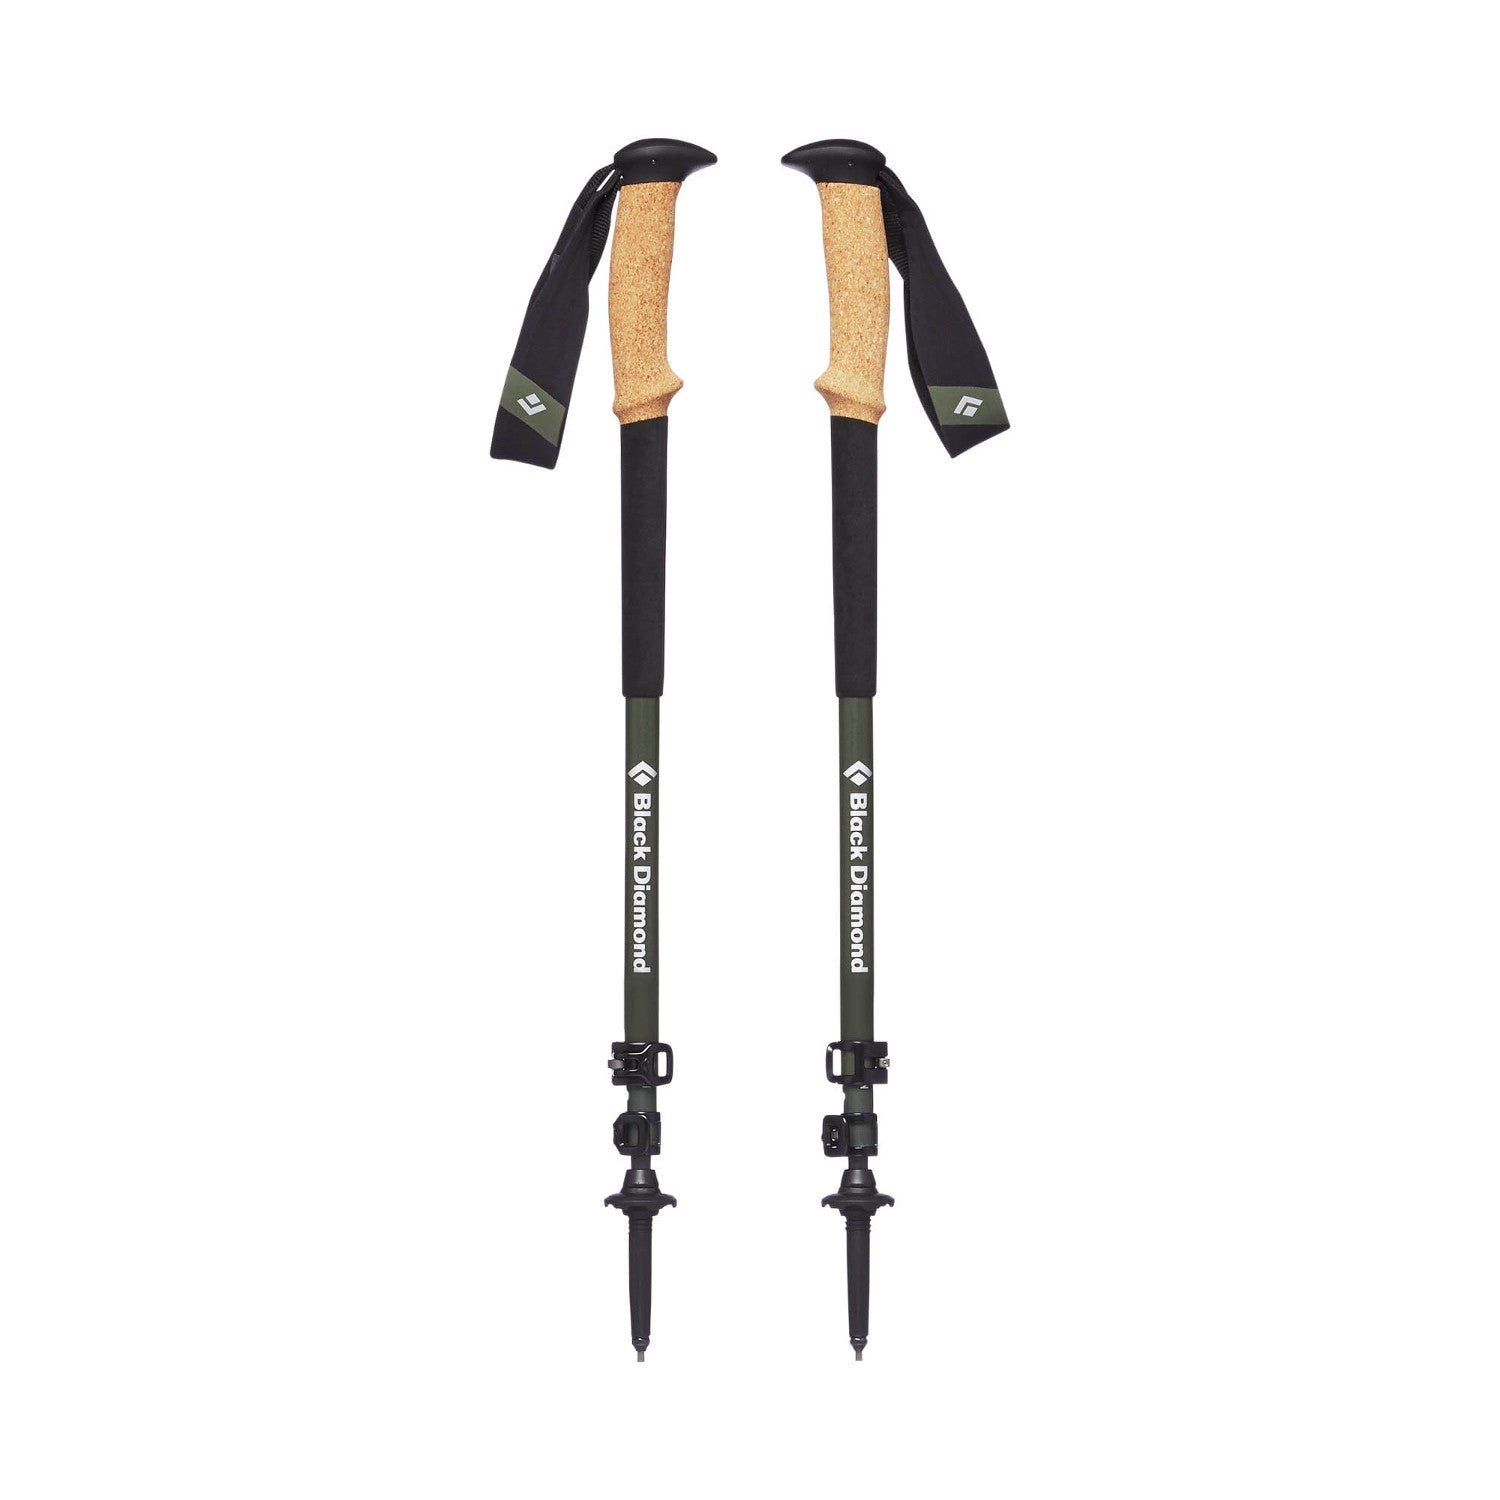 Pair of Black Diamond Alpine Carbon Cork poles, shown fully extended and stood upright 